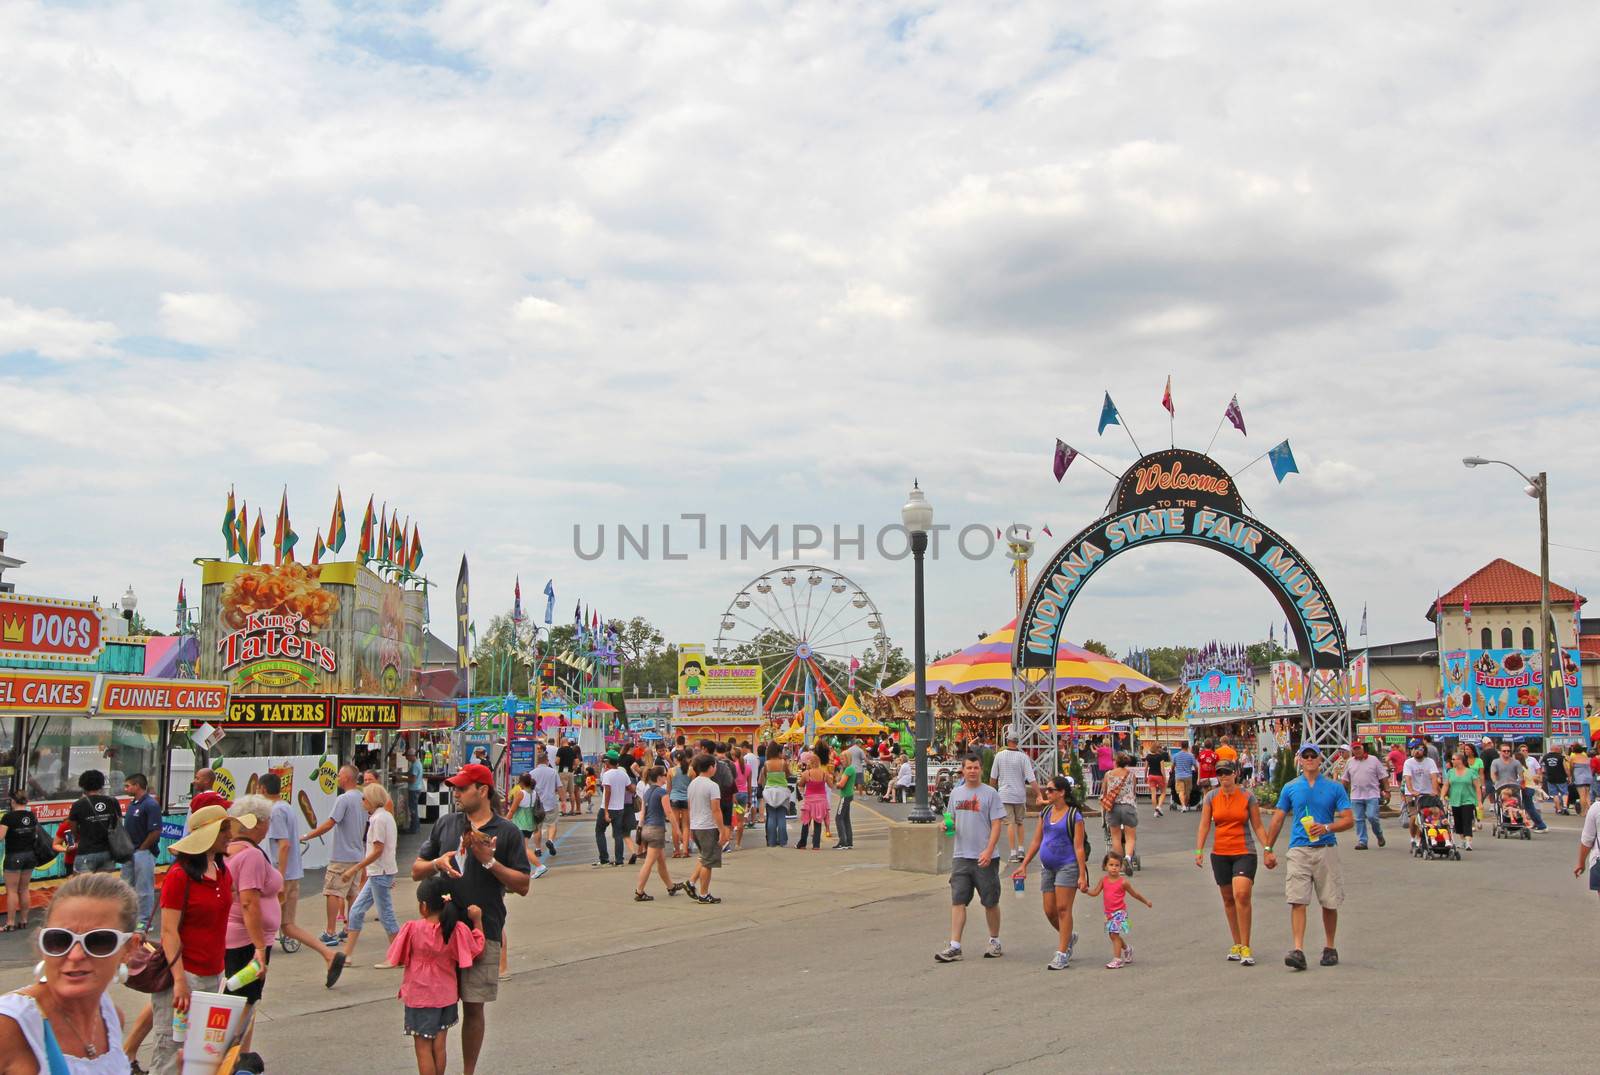 Entrance to the Midway at the Indiana State Fair by sgoodwin4813